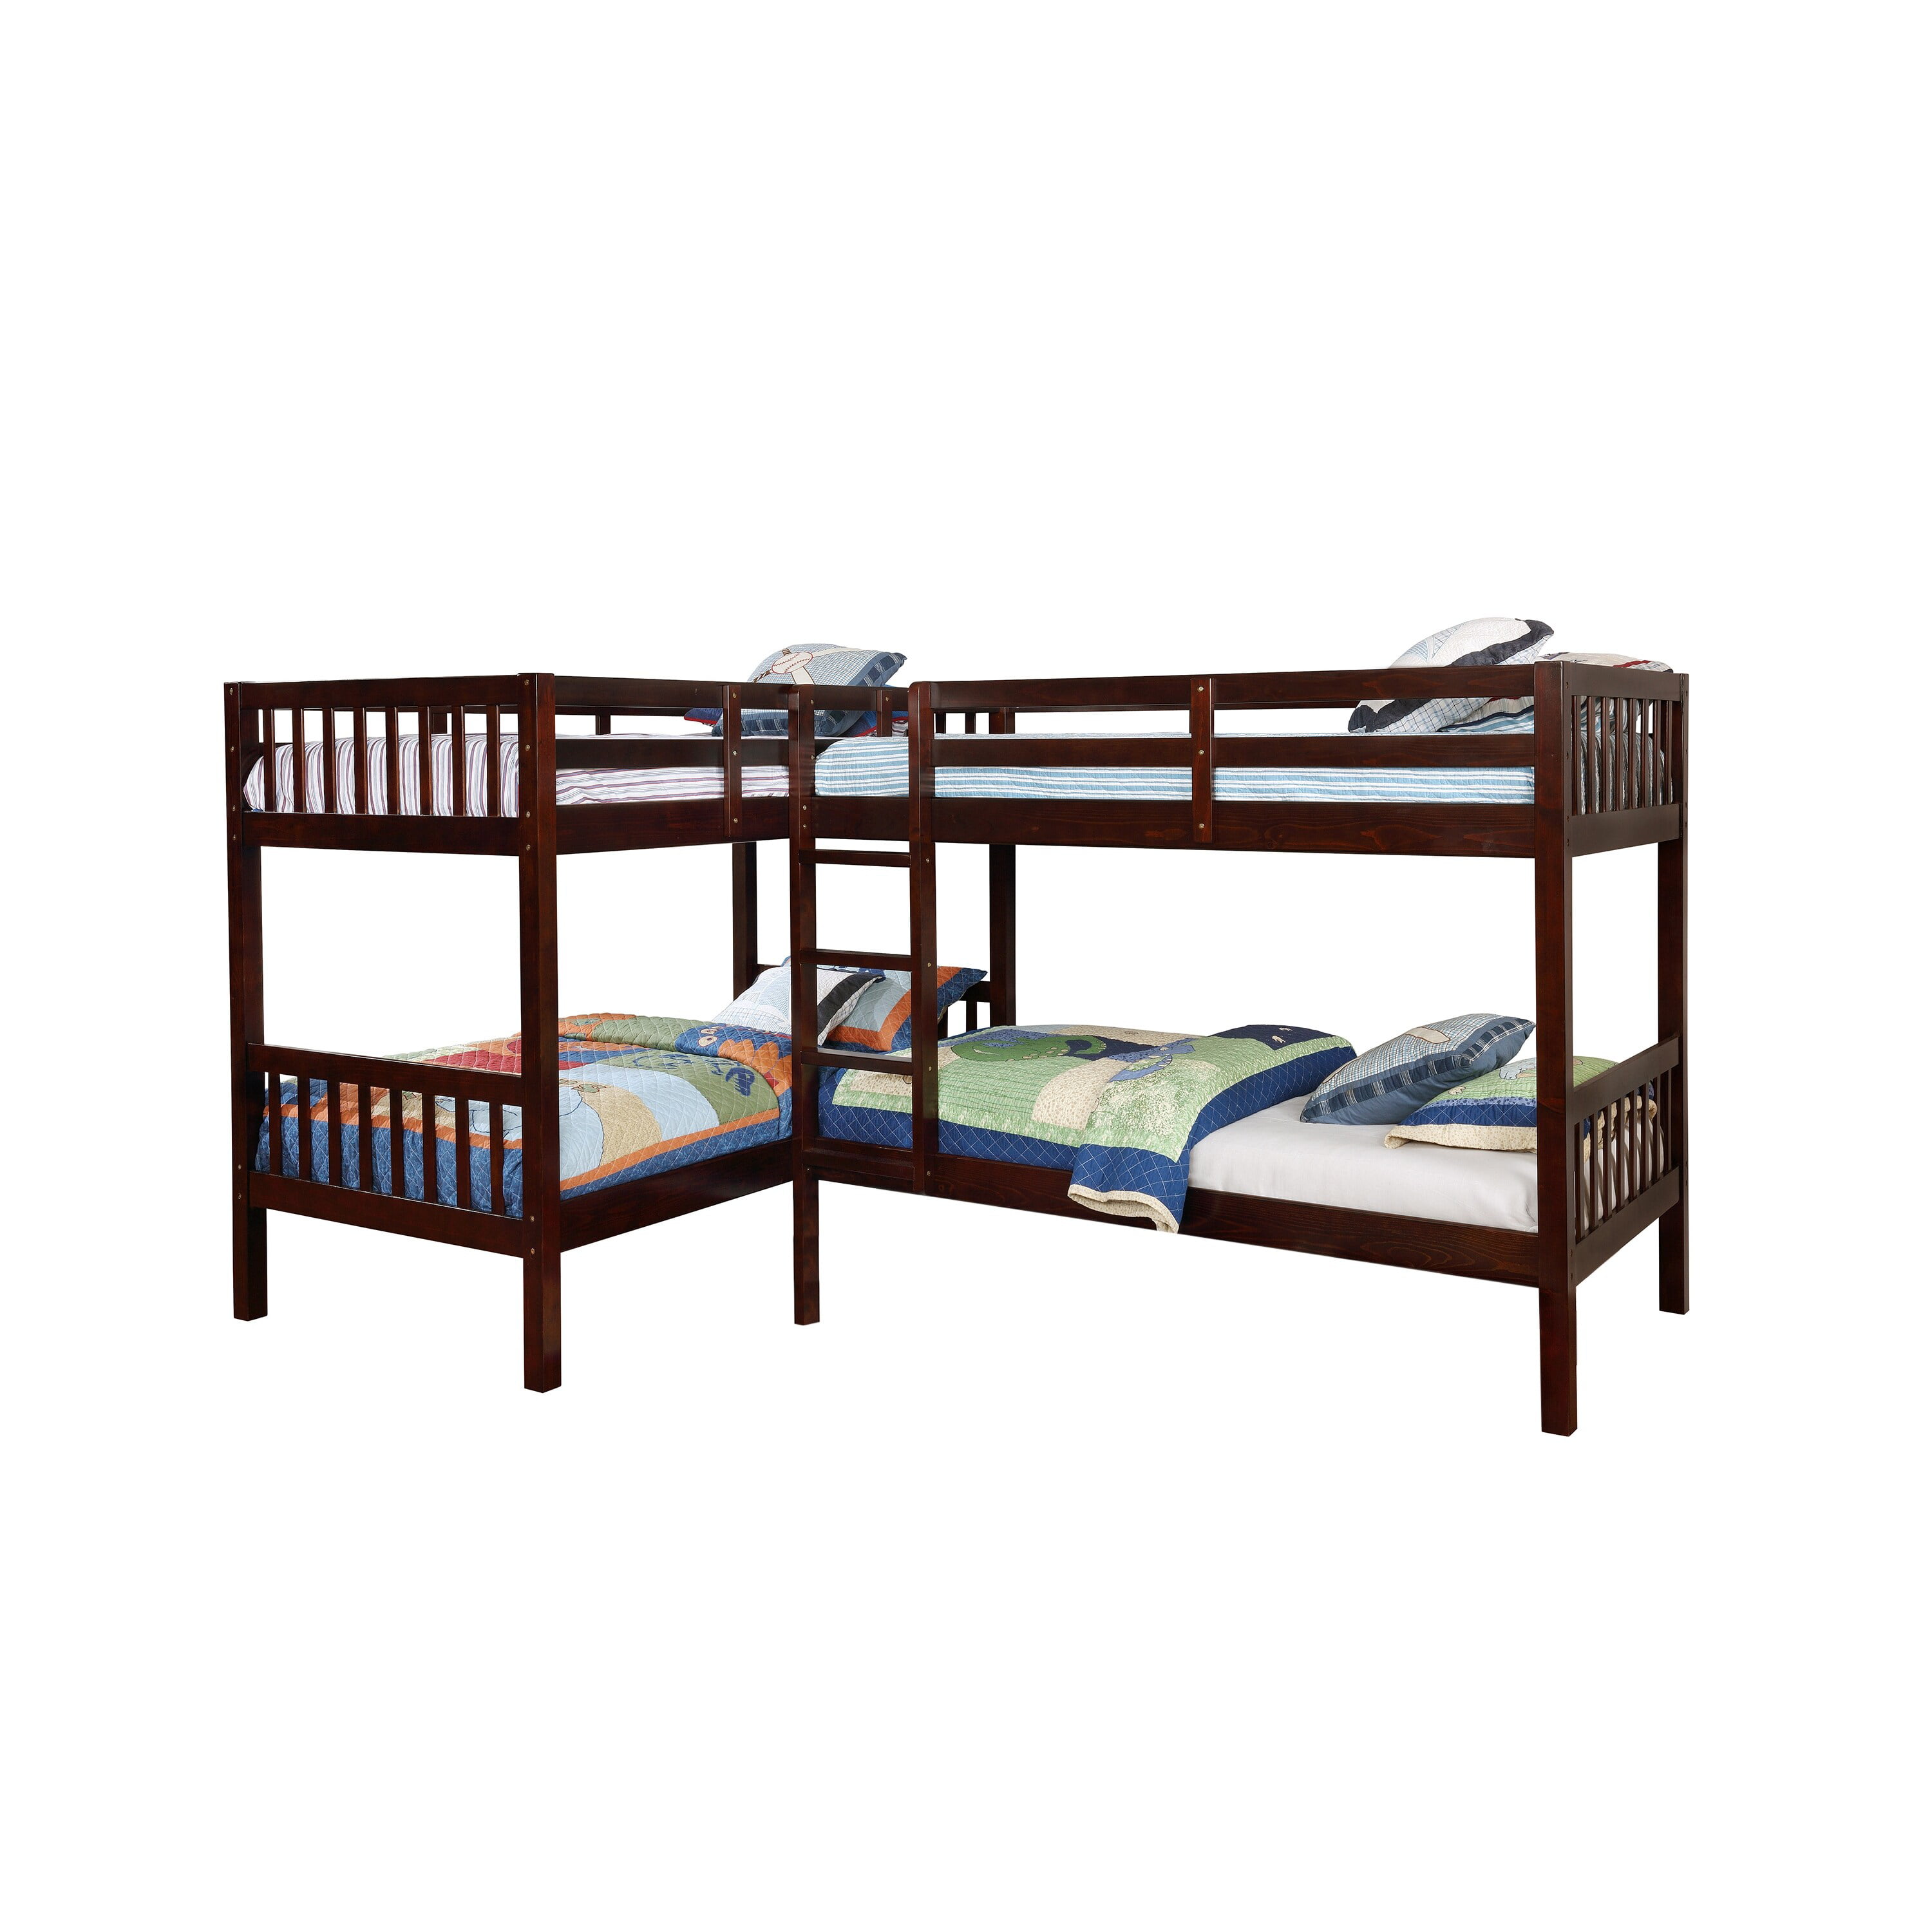 Acme Allentown Twin Bunk Bed With, Allentown Bunk Bed Trundle